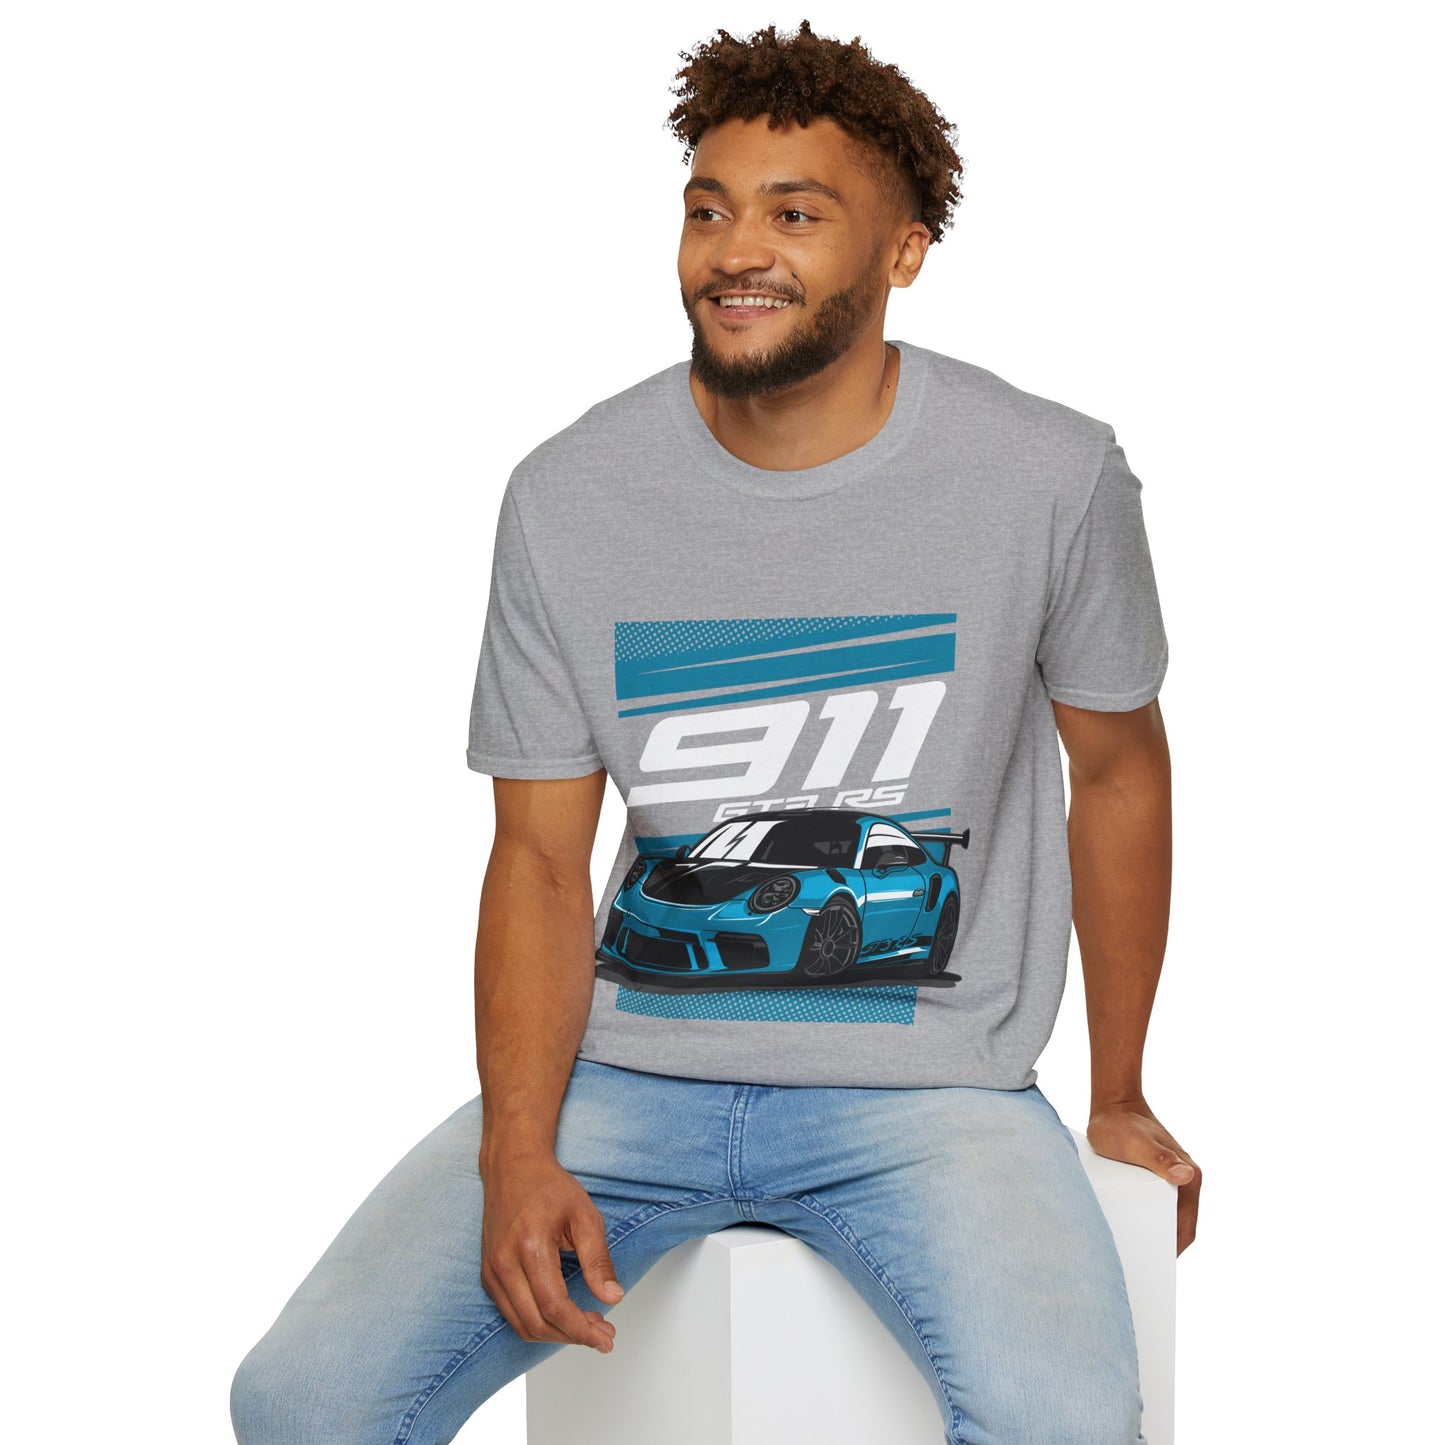 911 GT3 RS Graphic Unisex Softstyle T-Shirt